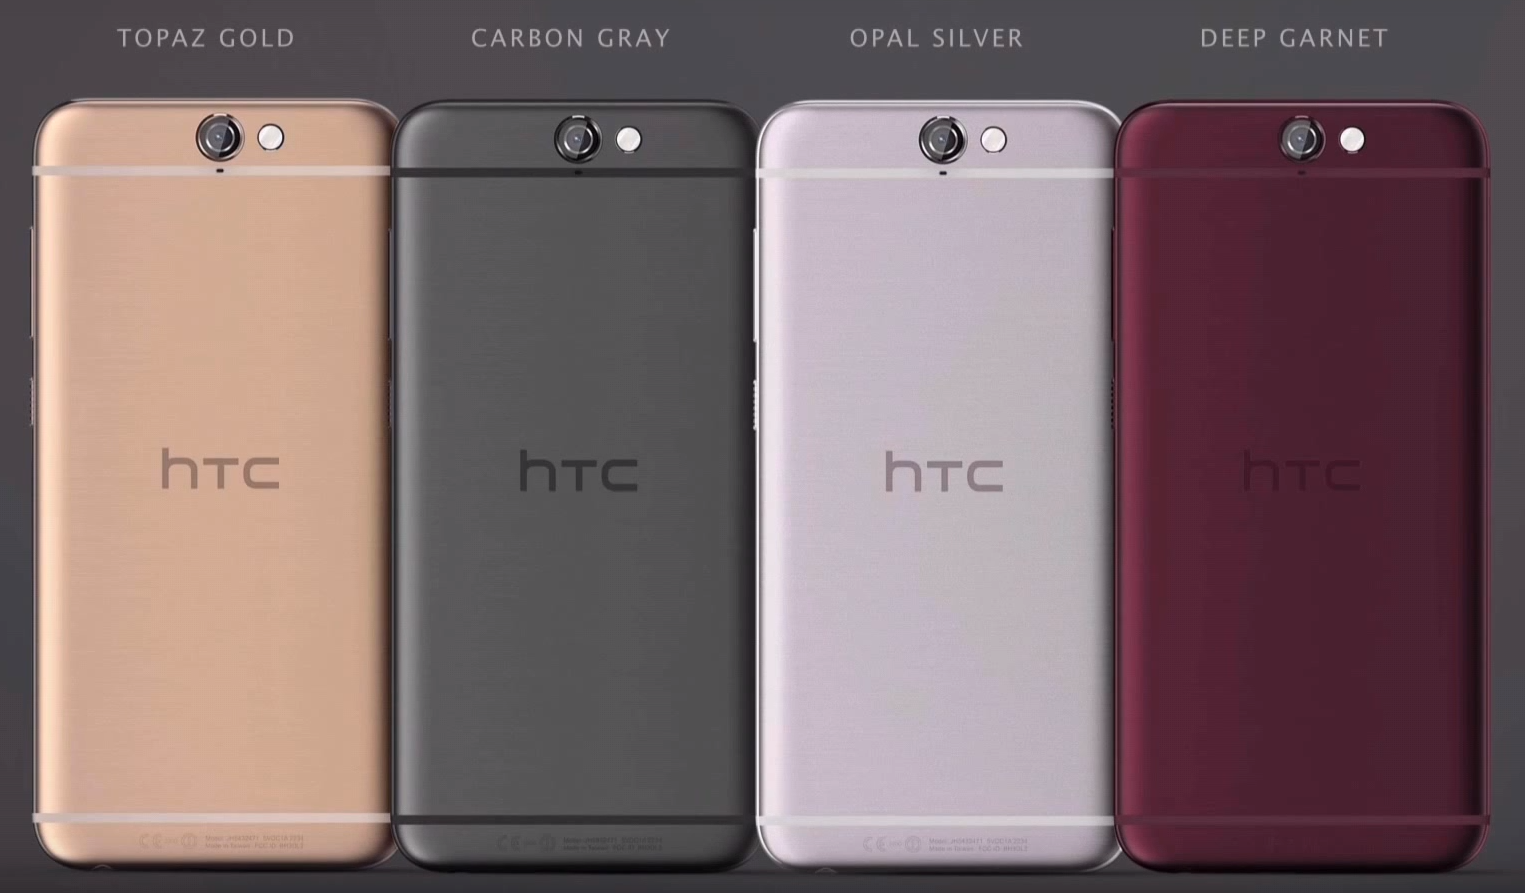 The range of colours that the HTC One A9 will come in